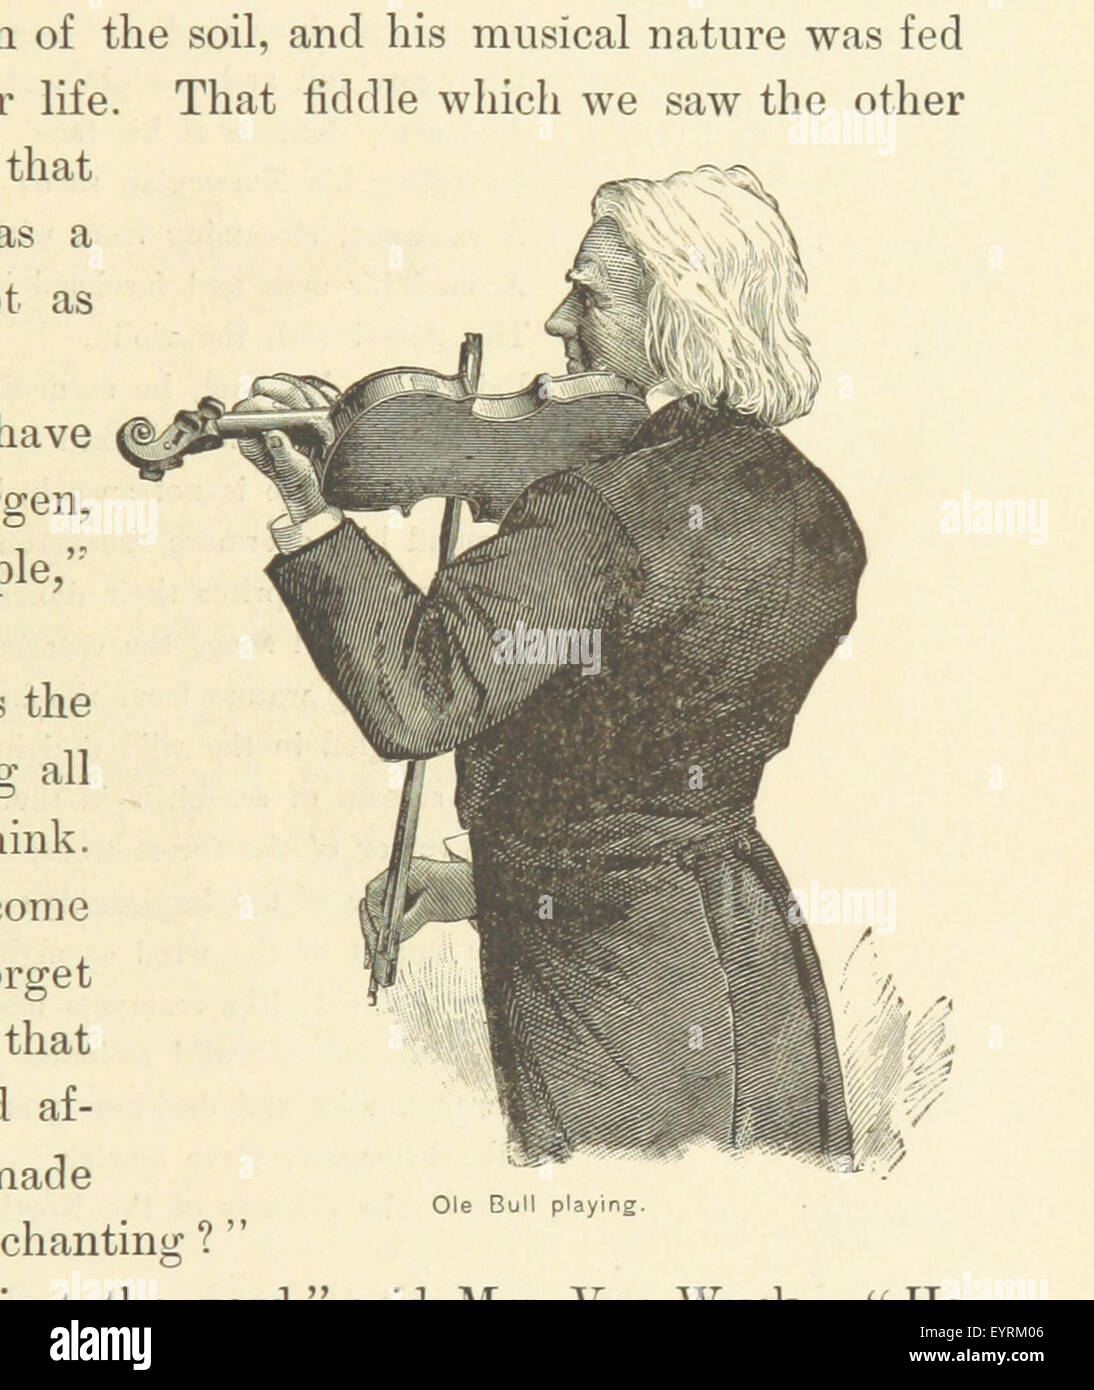 Image taken from page 97 of 'The Viking Bodleys; an excursion into Norway and Denmark ... With illustrations' Image taken from page 97 of 'The Viking Bodleys; an Stock Photo